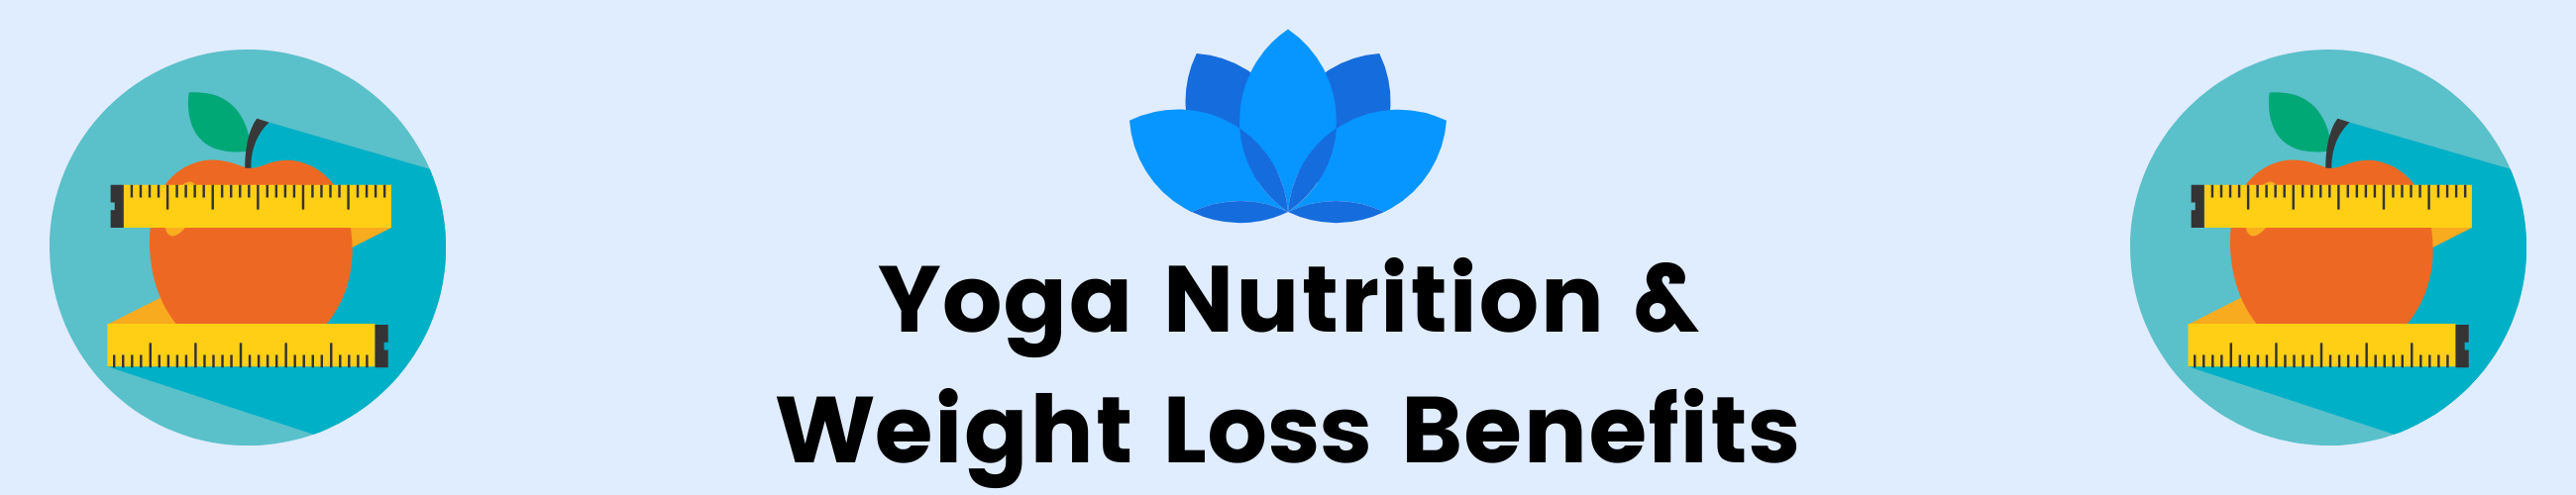 Yoga Nutrition & Weight Loss Benefits